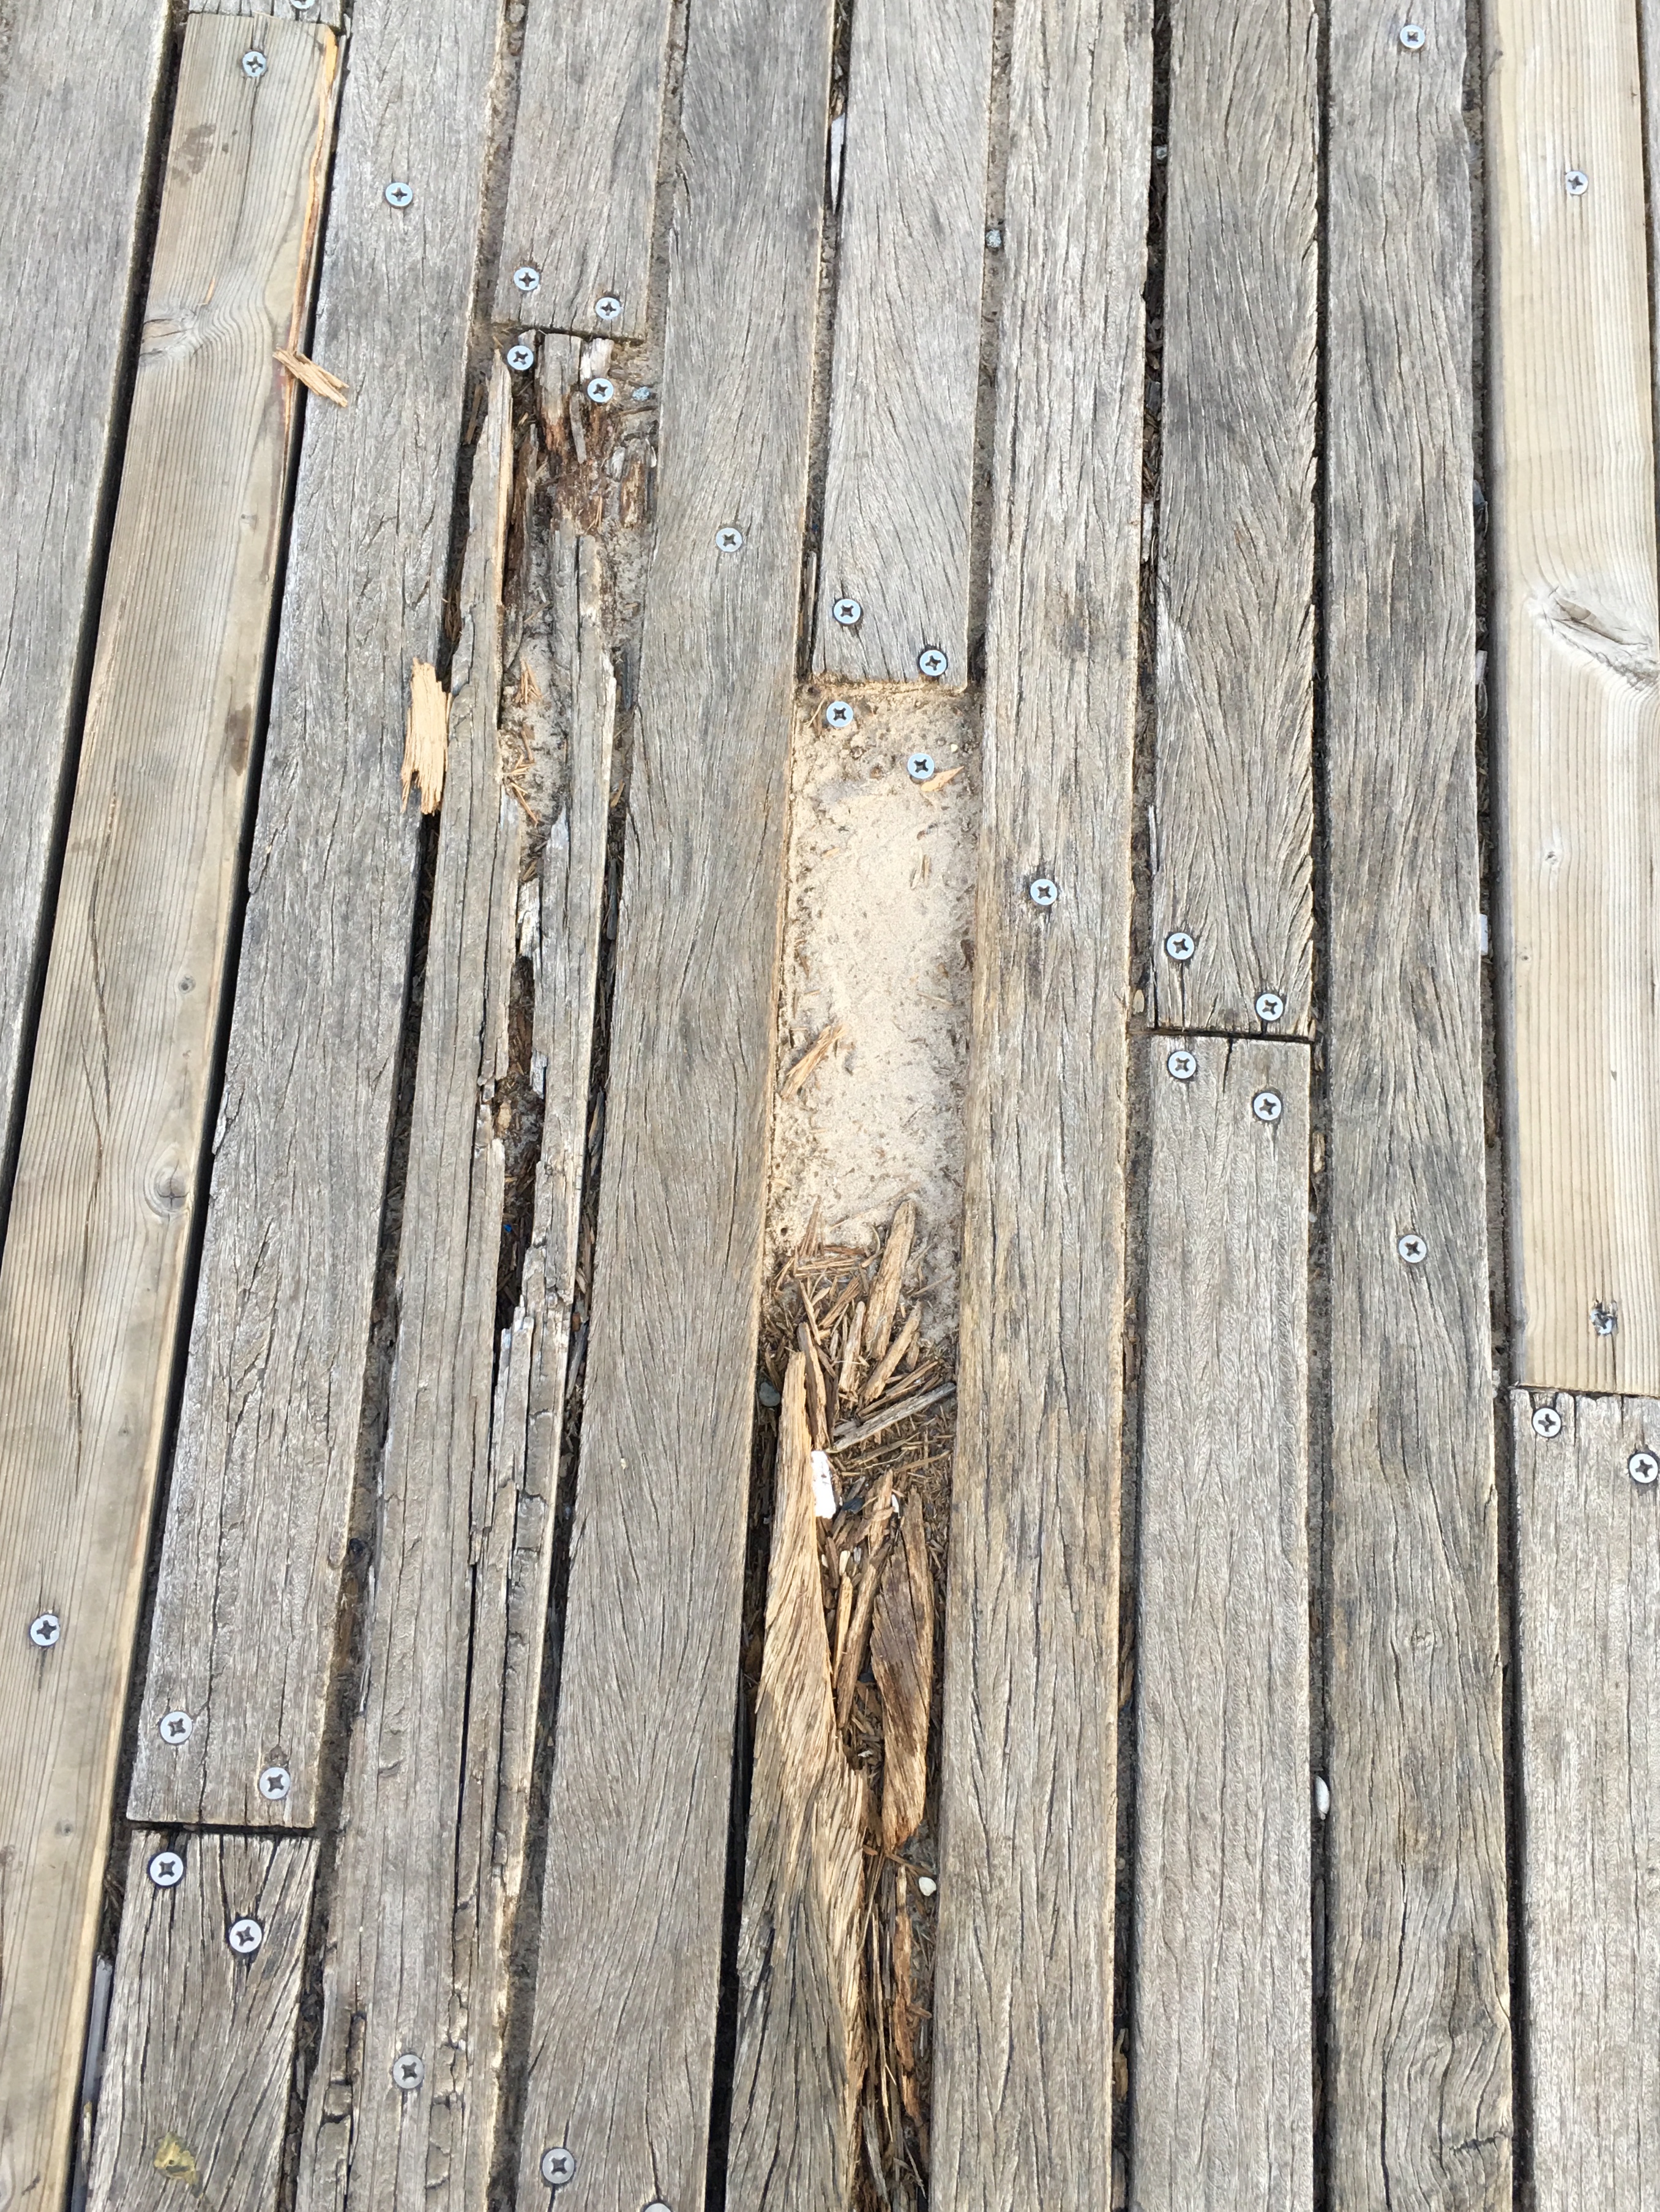 There are numerous broken Boardwalk planks near Coney Island Avenue. Eagle photo by Lore Croghan